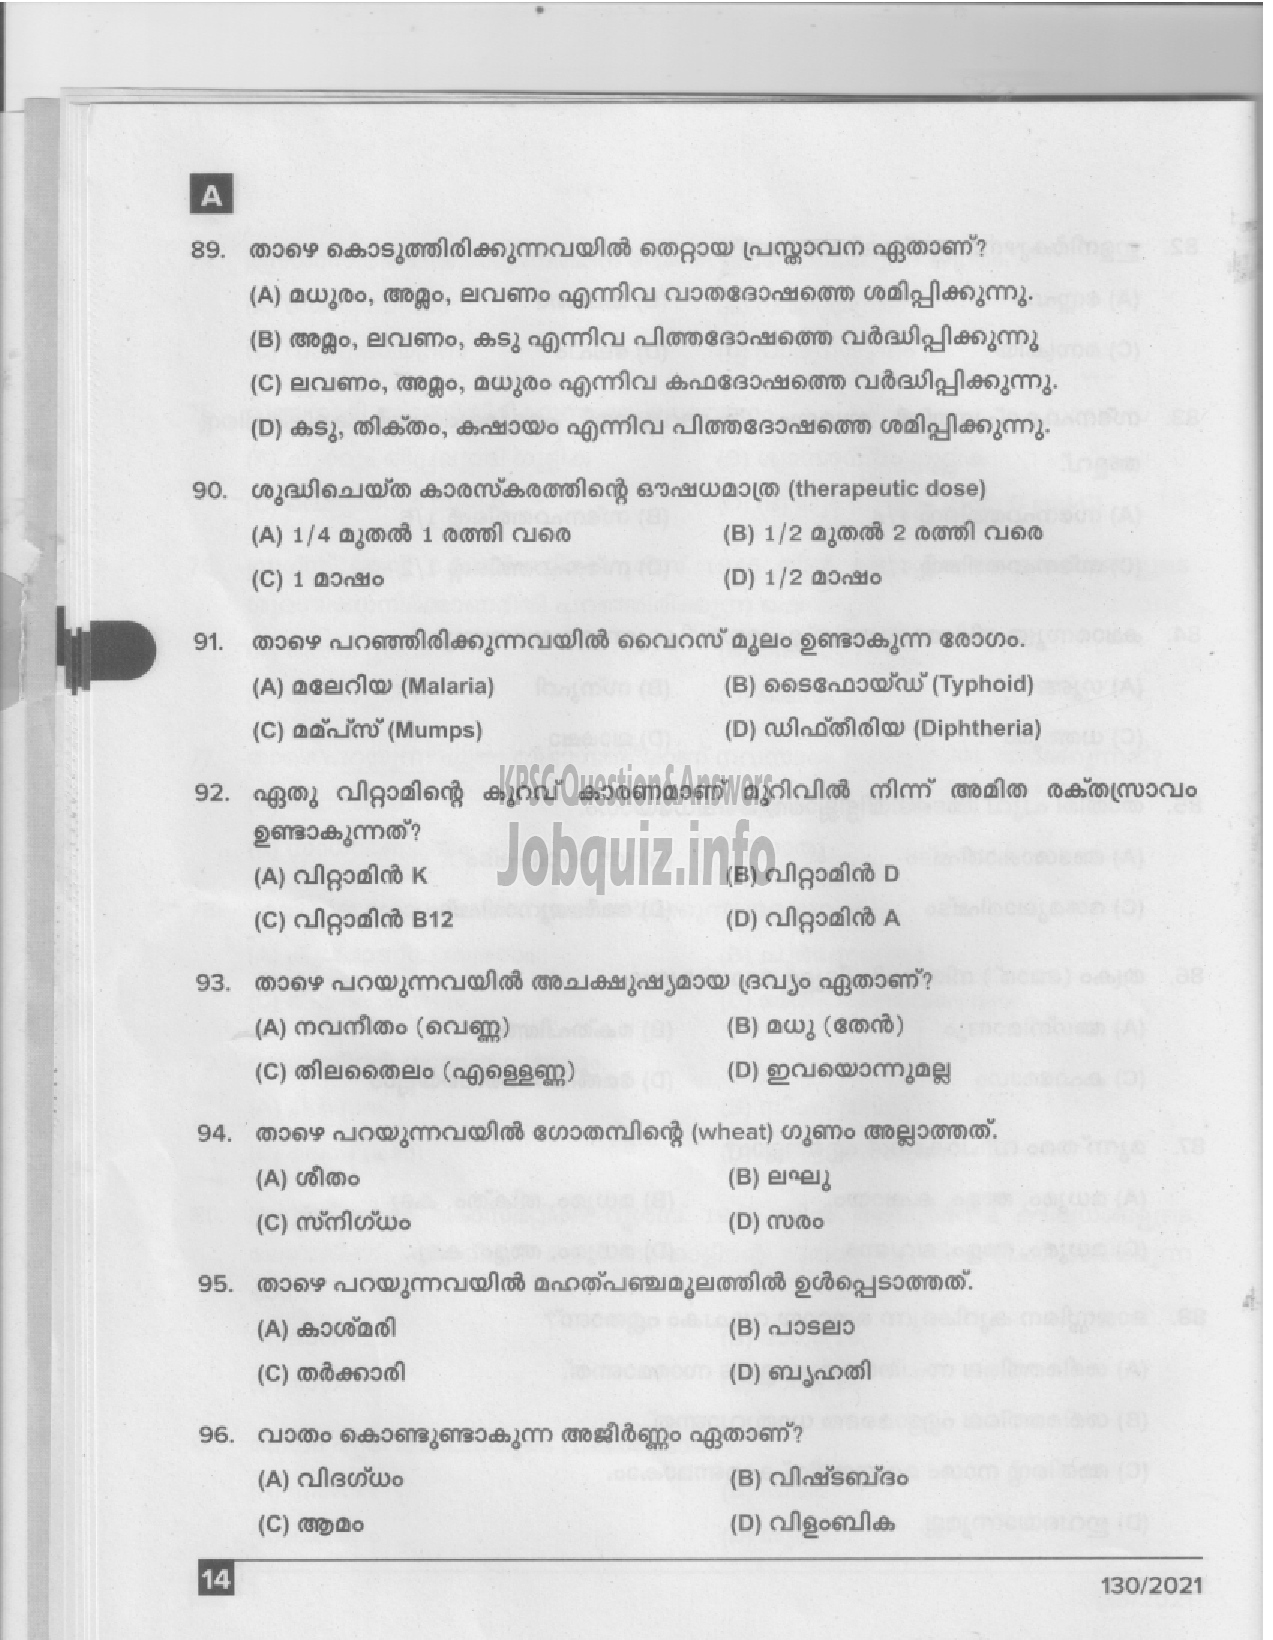 Kerala PSC Question Paper - Pharmacist Gr II (Ayurveda) - ISM/ IMS/ Ayurveda Colleges-12